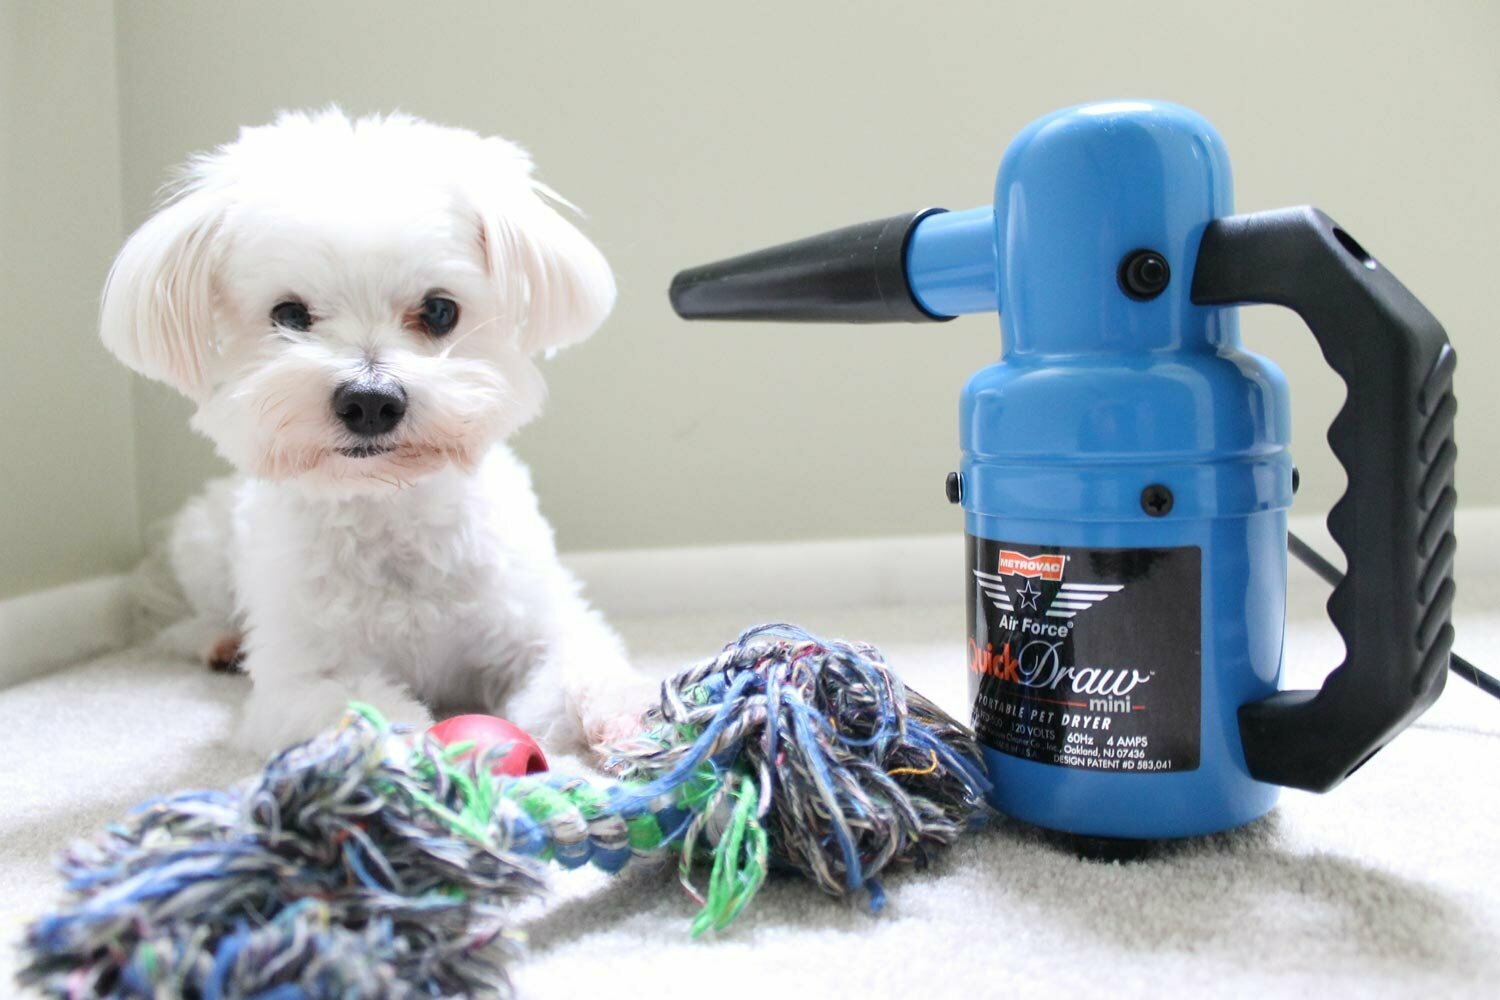 Air Force Quick Draw® Mini blower for dogs and pets